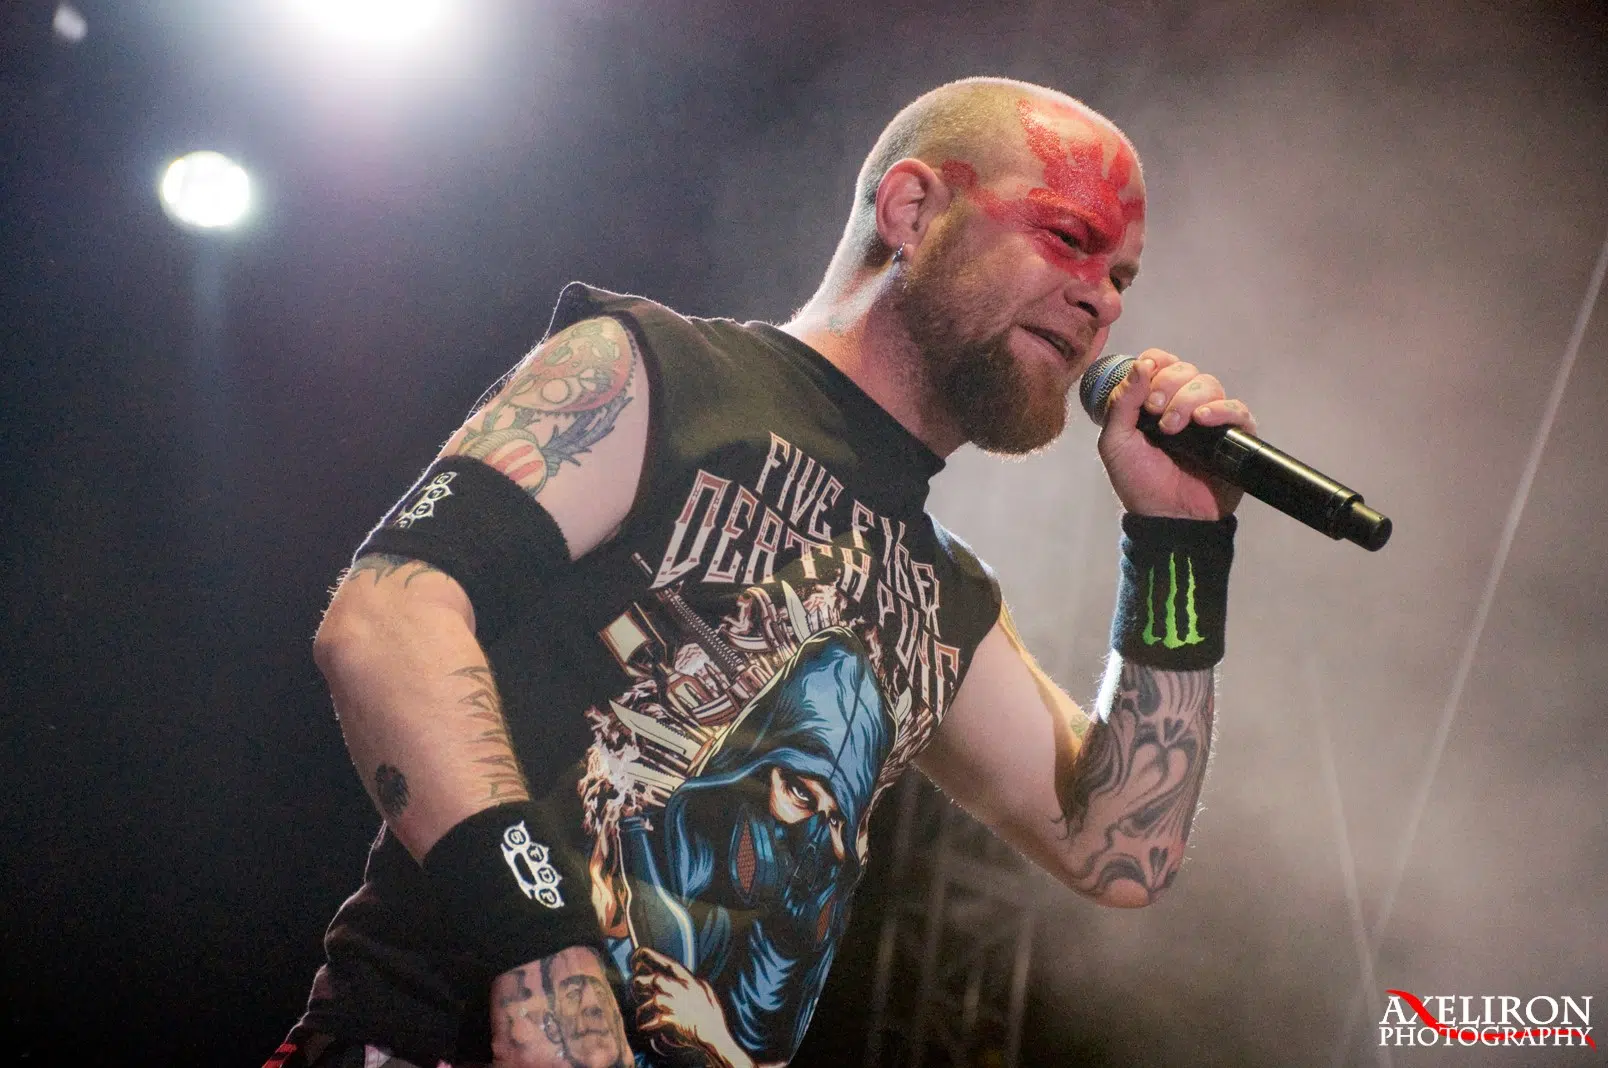 FIVE FINGER DEATH PUNCH Vocalist to Turn His Two Homes Into Recovery Houses